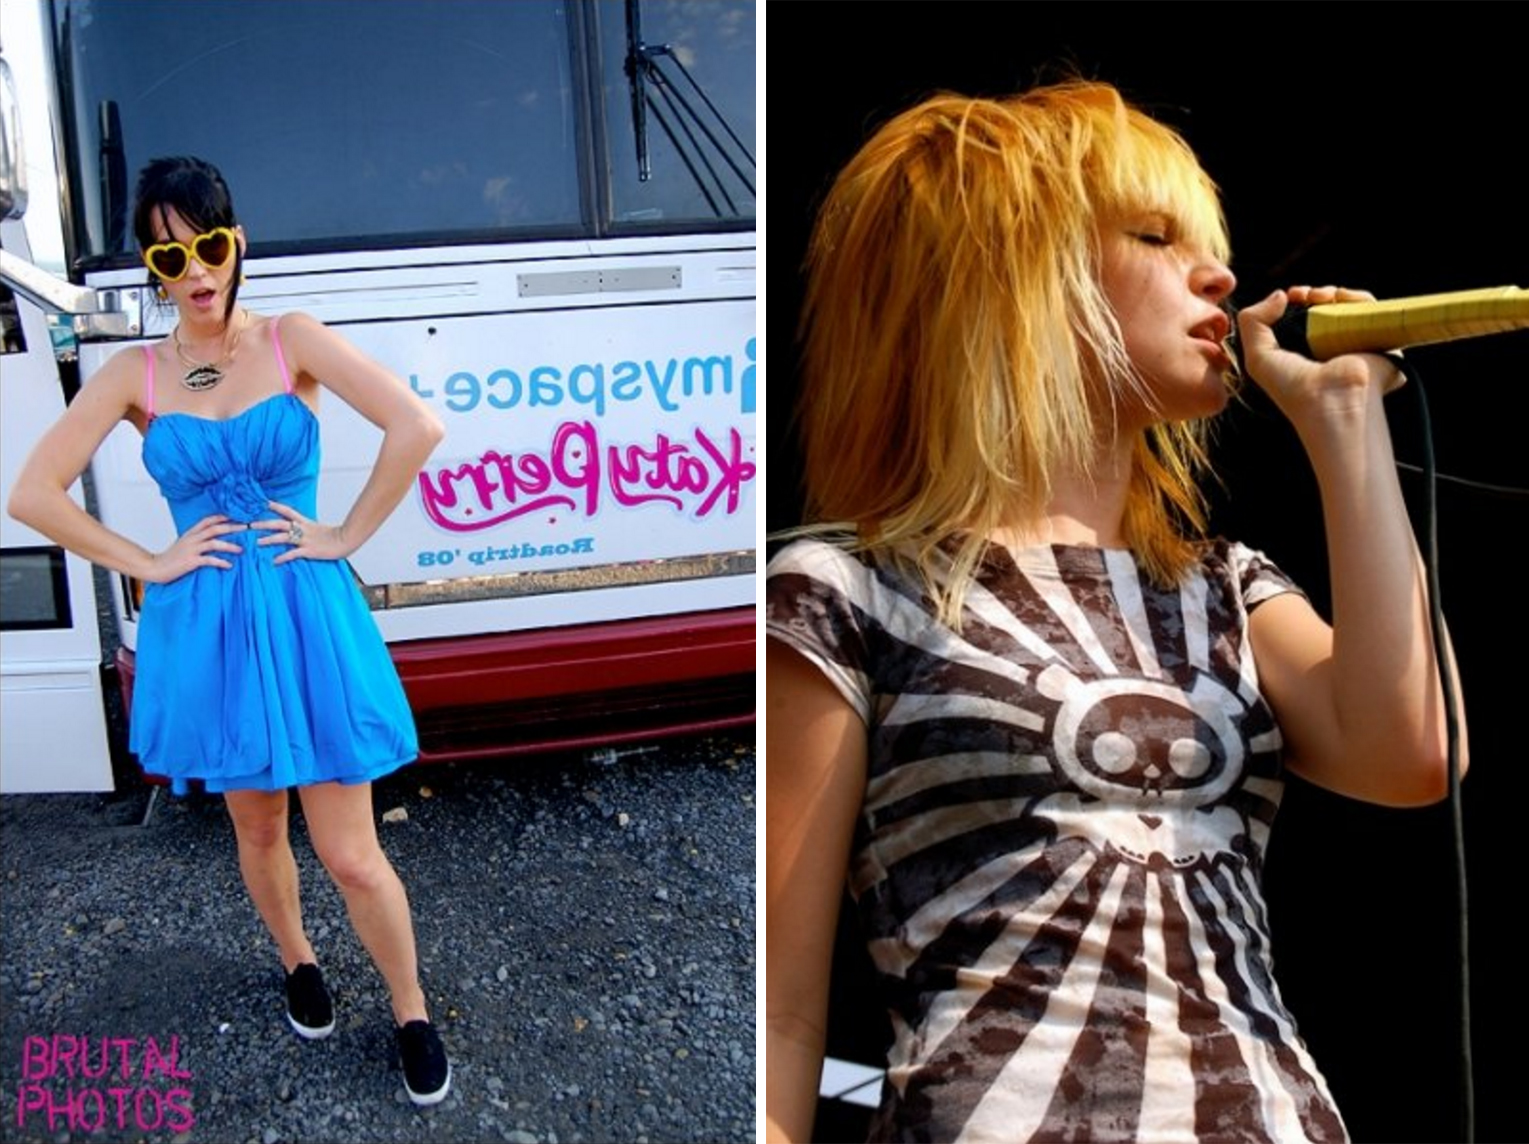 Left: Katy Perry, 2008. Right: Hayley Williams of Paramore, 2007.